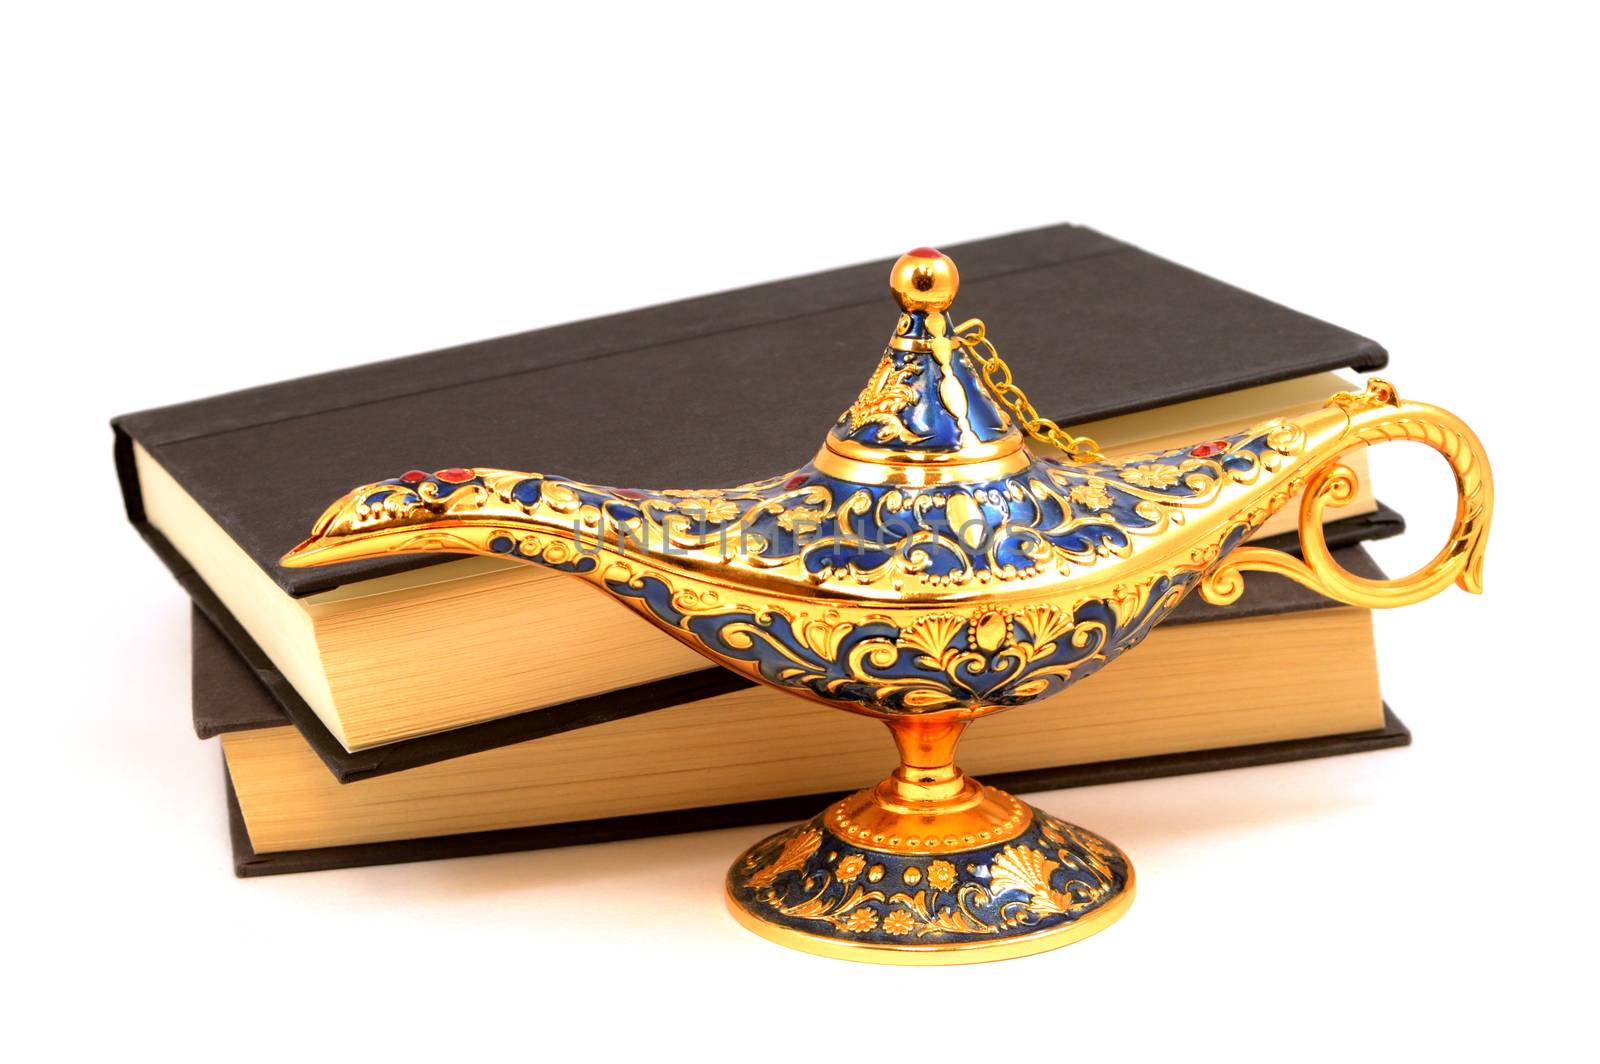 A set of isolated books and a genie lamp to give the reader stories of legends.